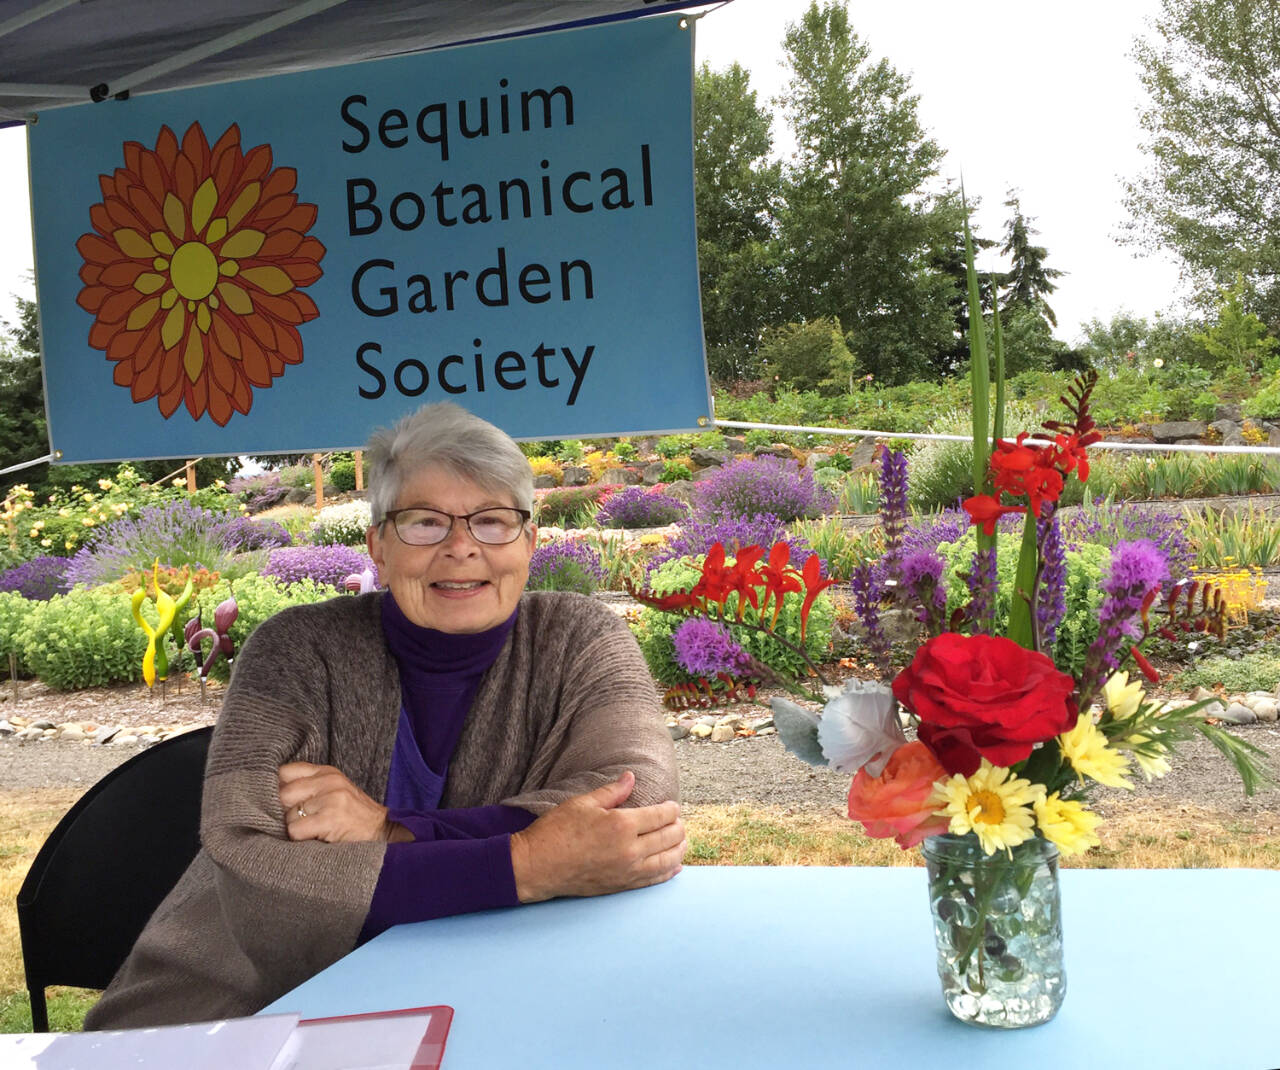 Photo by Renne Emiko Brock
Join Mary Crook, a volunteer with the Sequim Botanical Garden Society, to learn about attractive flower arrangements for a “Work to Learn” party at 1 p.m. Saturday, Sept. 24, at the Sequim Botanical Garden Terrace Garden.